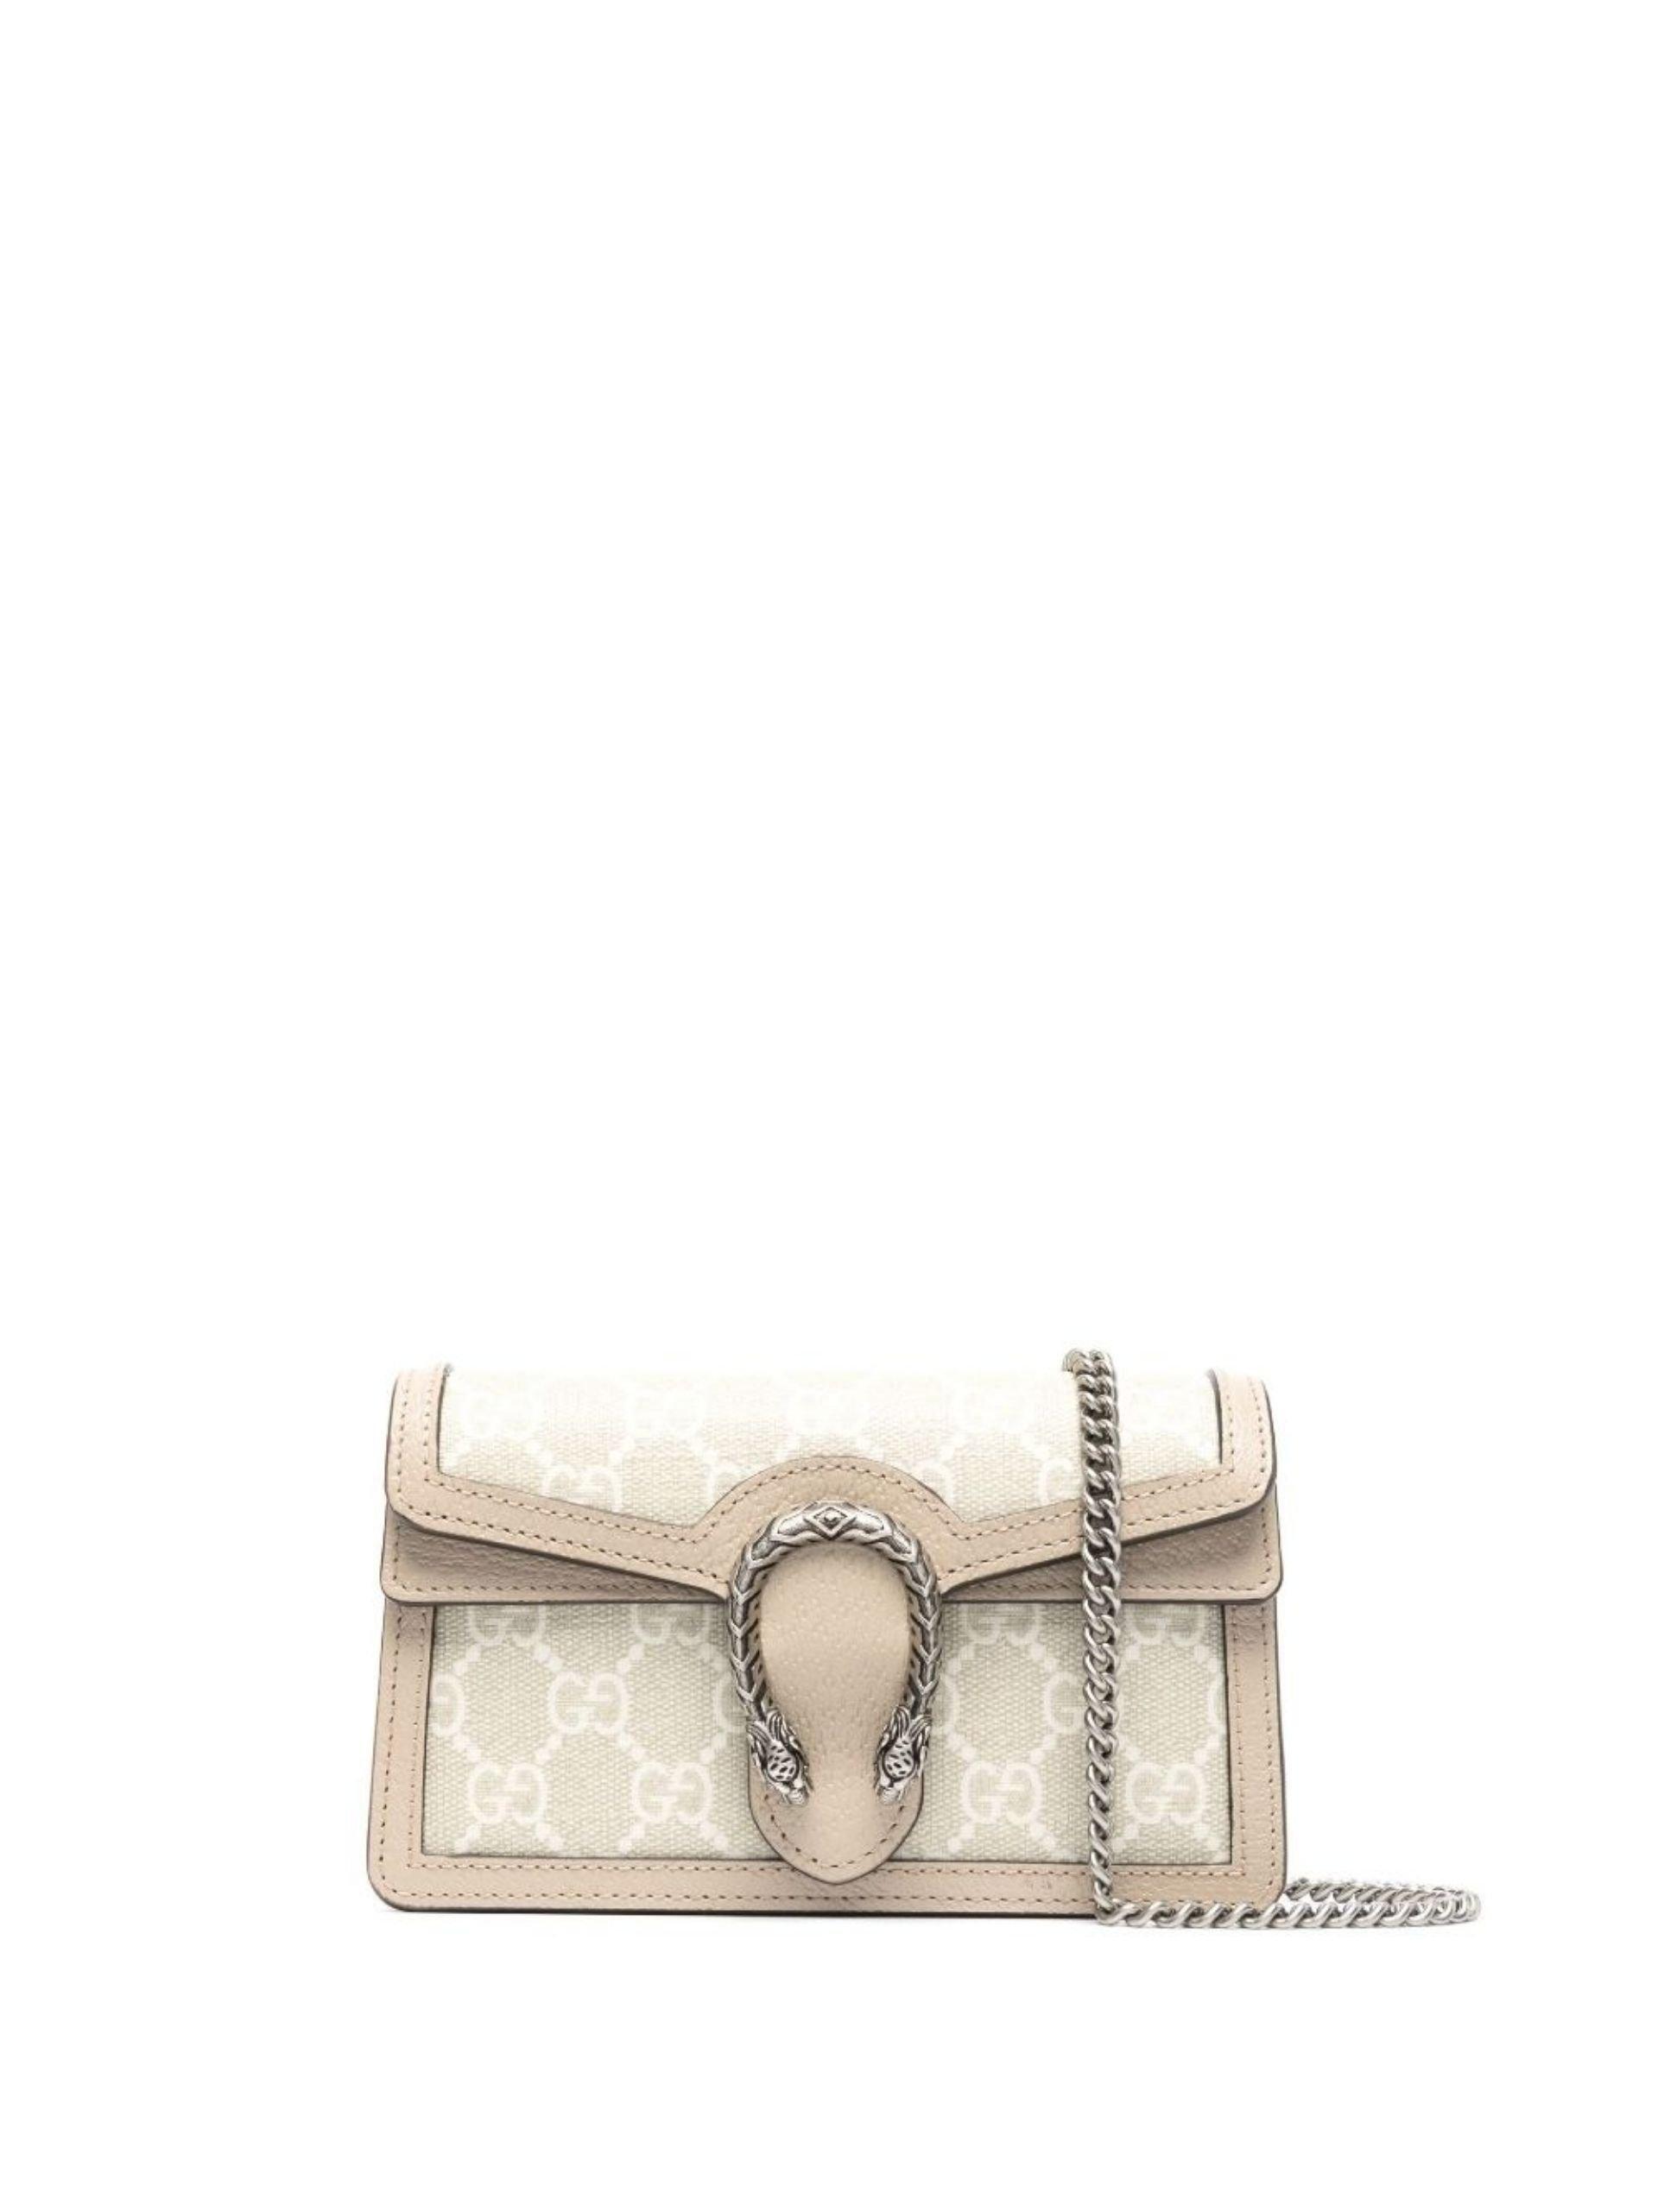 Gucci Dionysus Shoulder Bag Super Mini White in Leather with